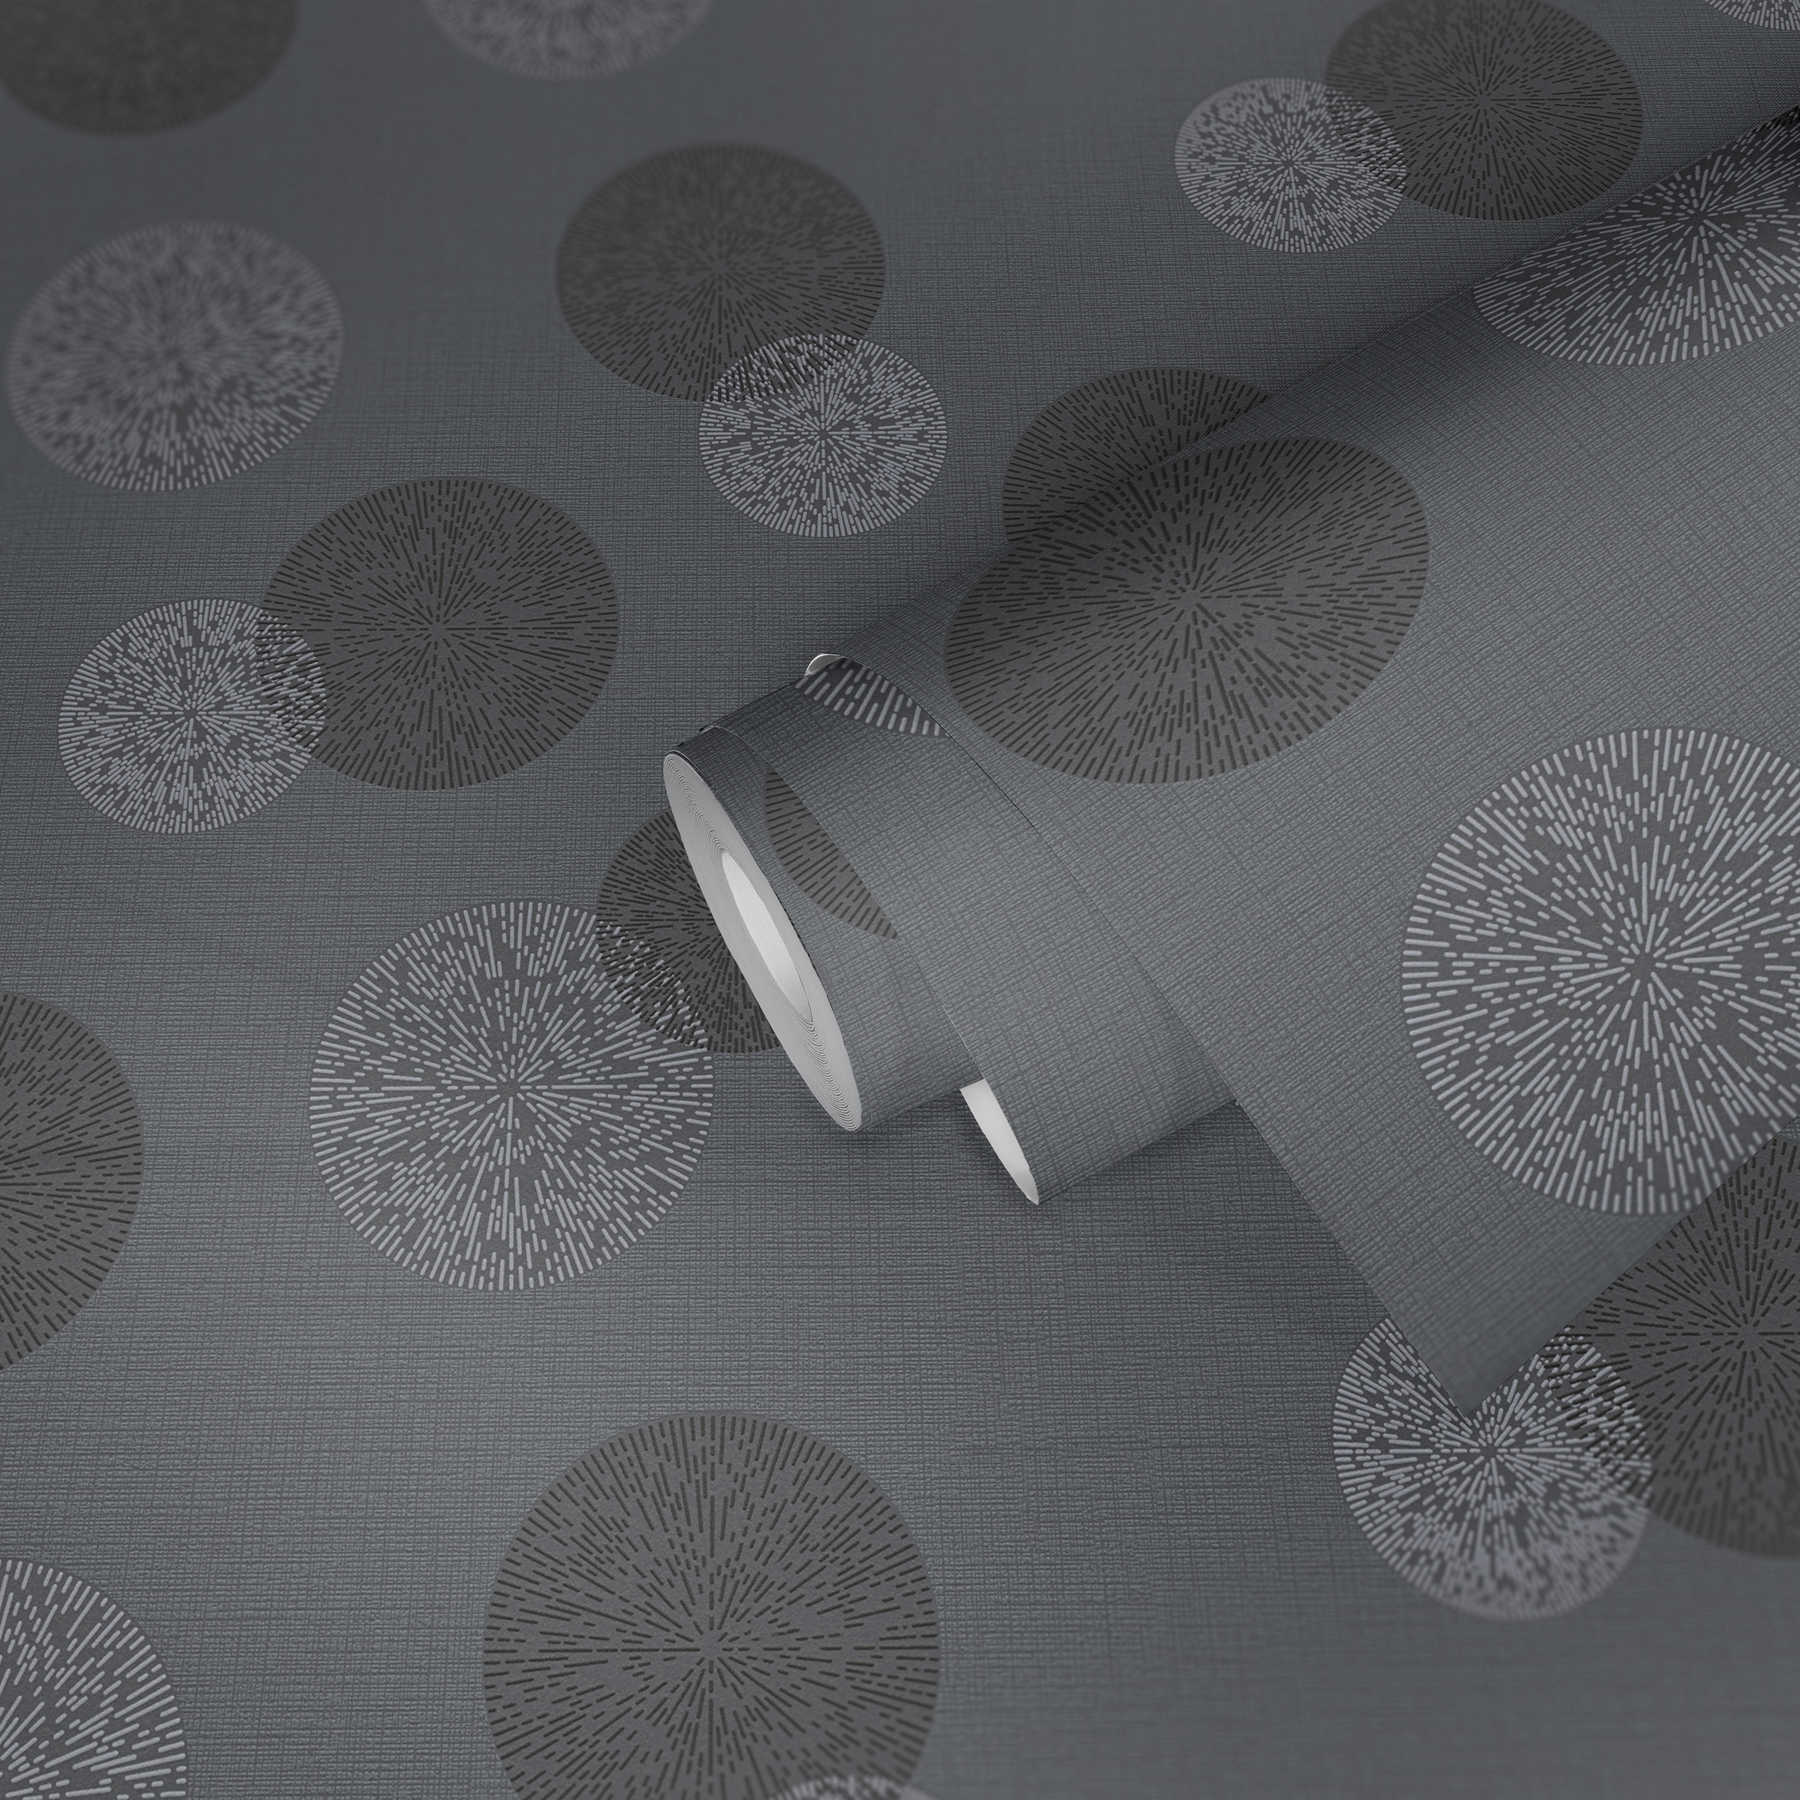             Living room wallpaper with modern circle pattern - grey
        